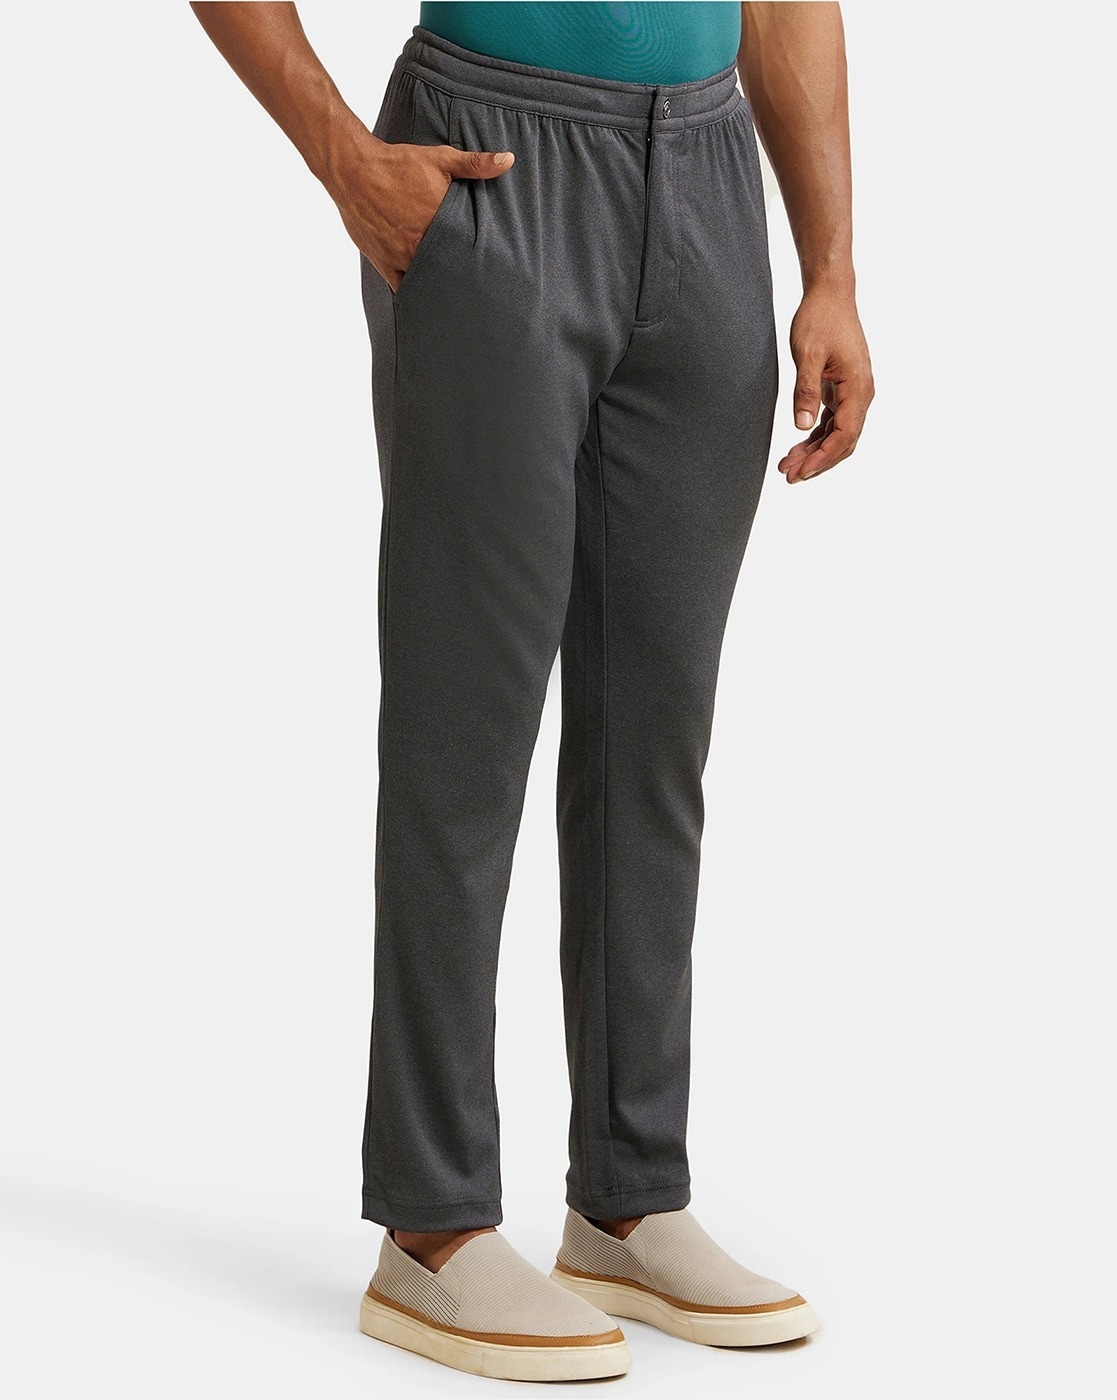 Athleisure Joggers for Men: Buy Athleisure Track Pants for Men Online at  Best Price | Jockey India